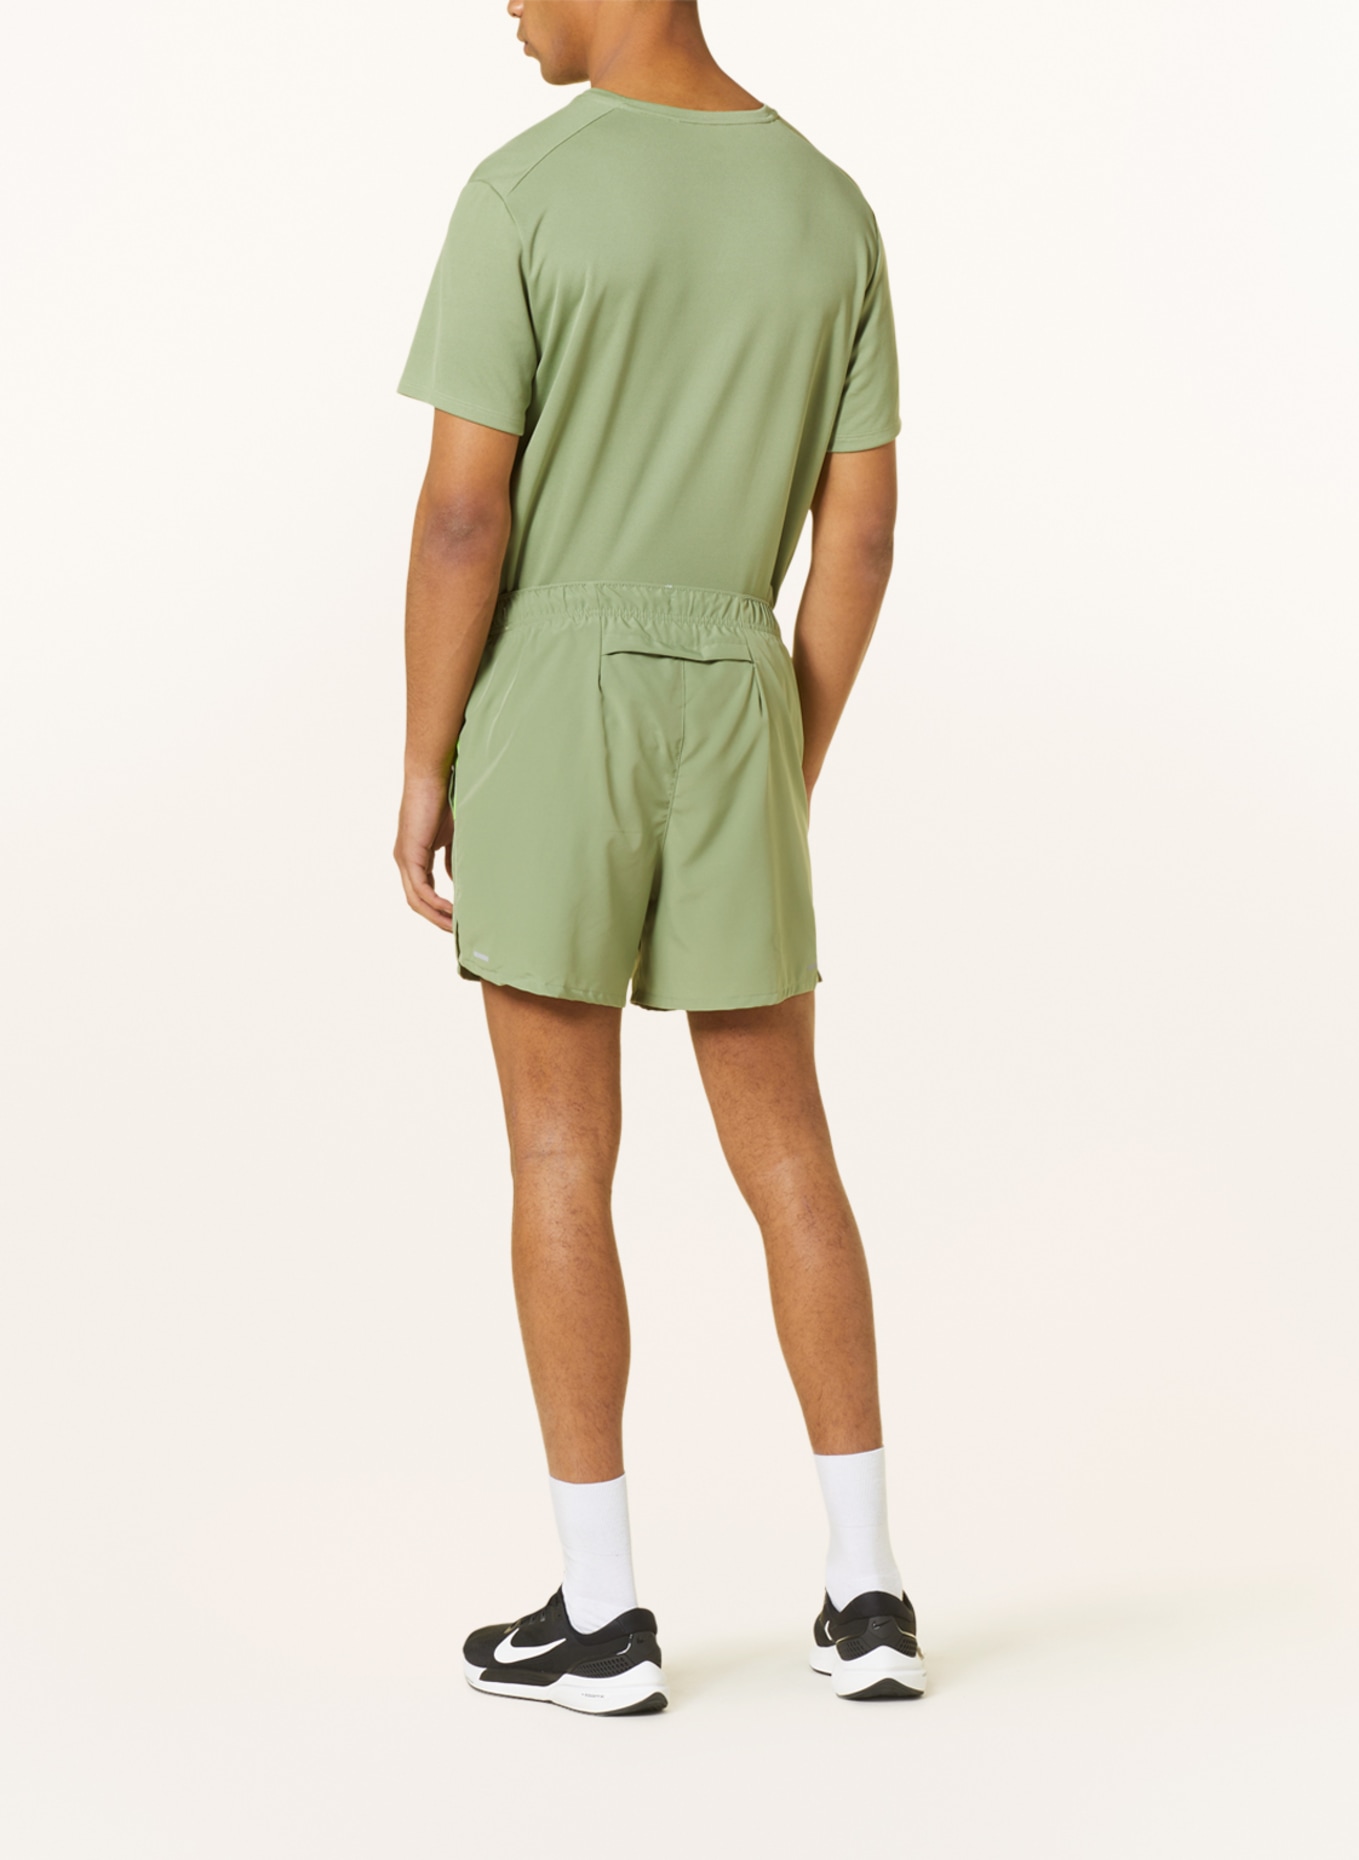 Nike 2-in-1 running shorts DRI-FIT RUN DIVISION CHALLENGE with mesh, Color: OLIVE/ NEON GREEN/ SILVER (Image 3)